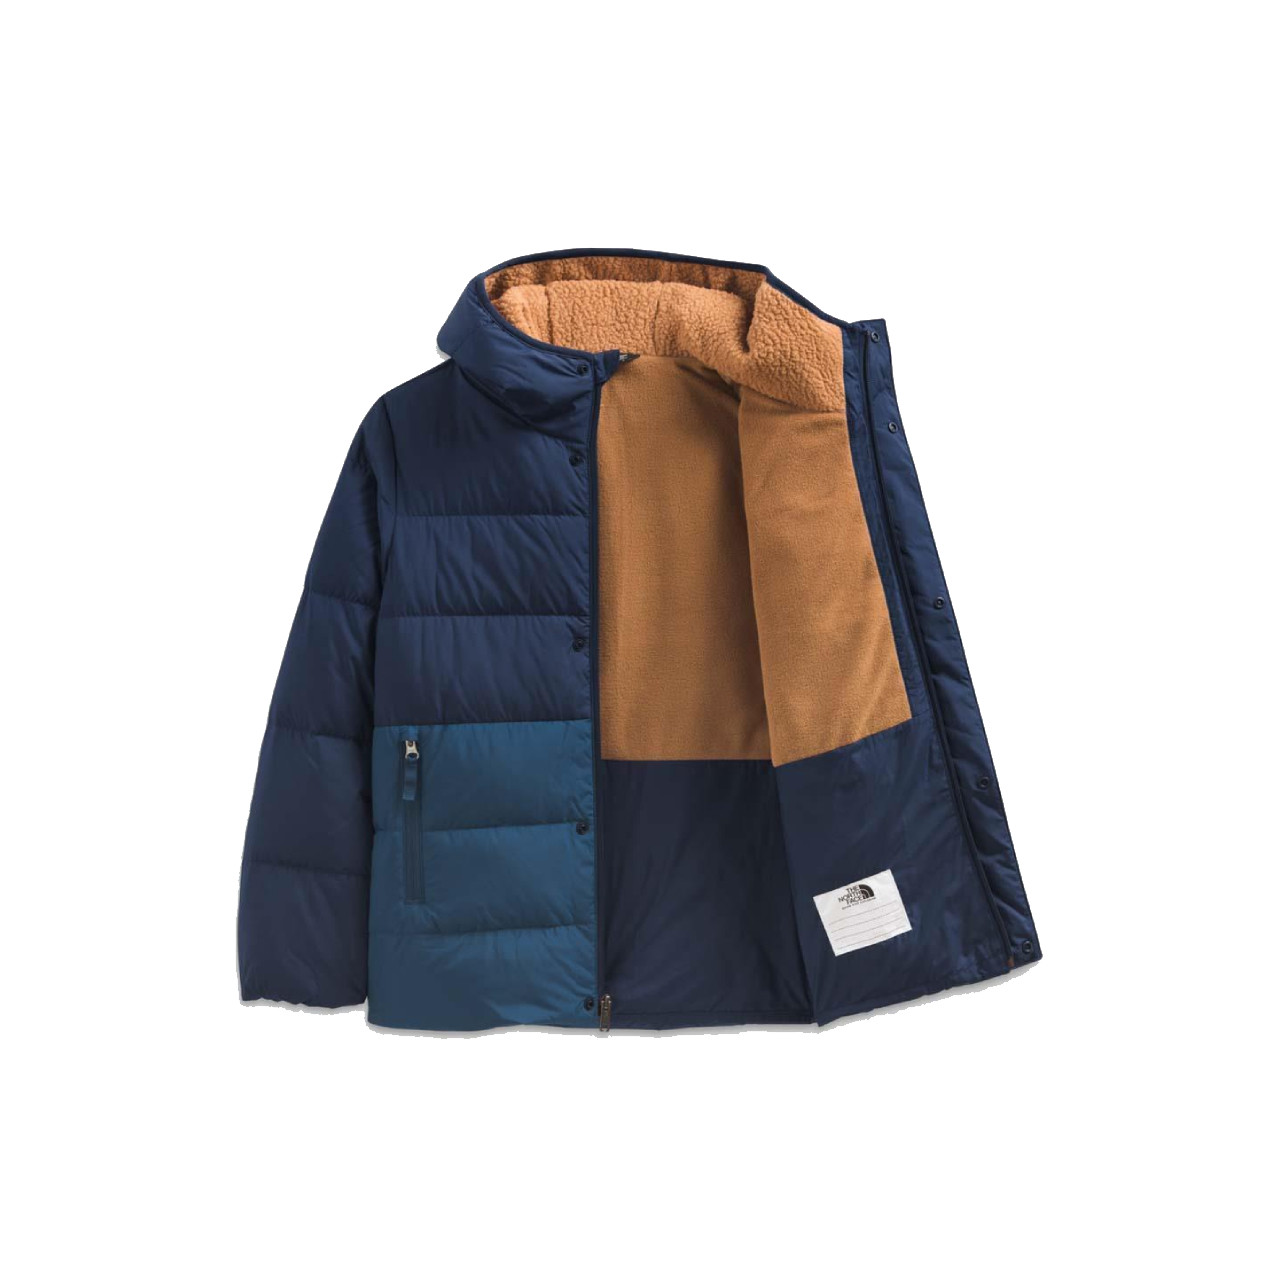  THE NORTH FACE Girls' Printed North Down Fleece-Lined